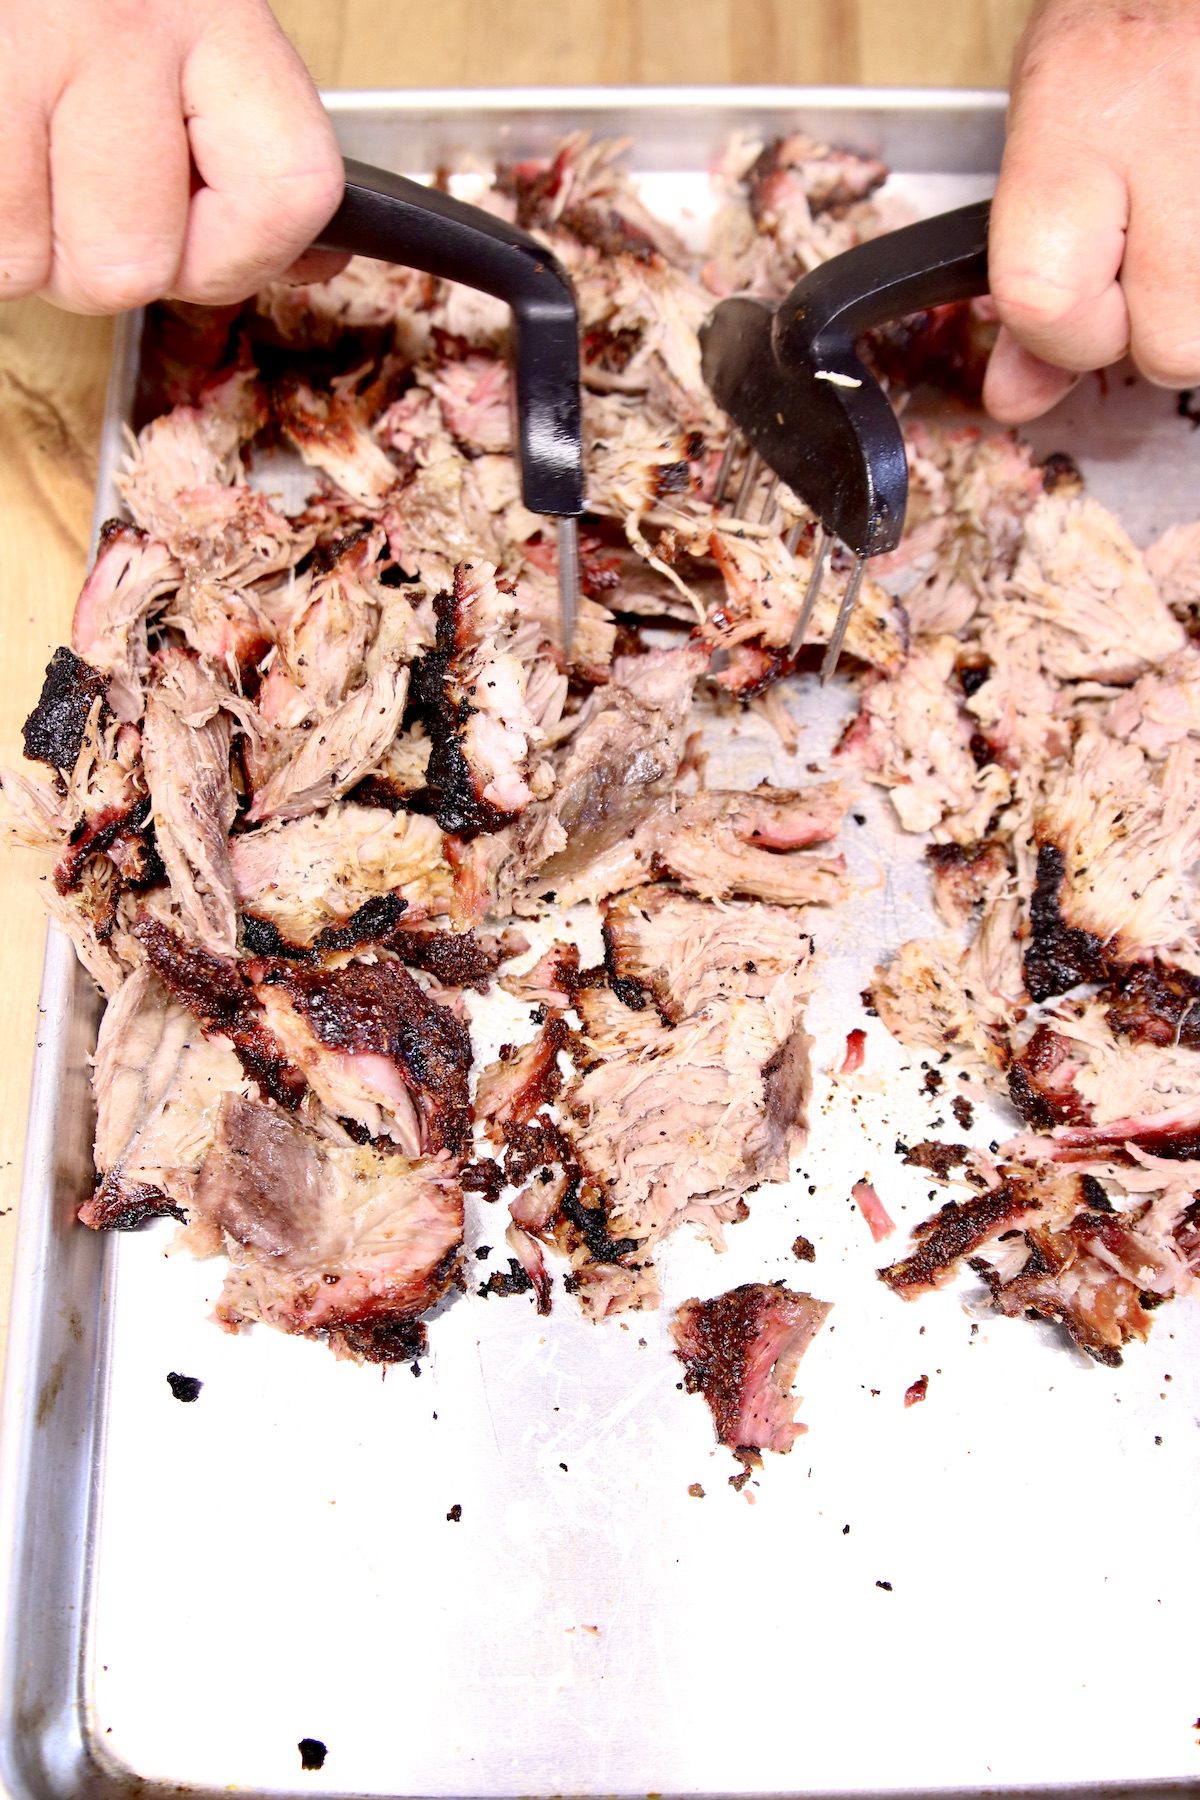 shredding pork with meat claws